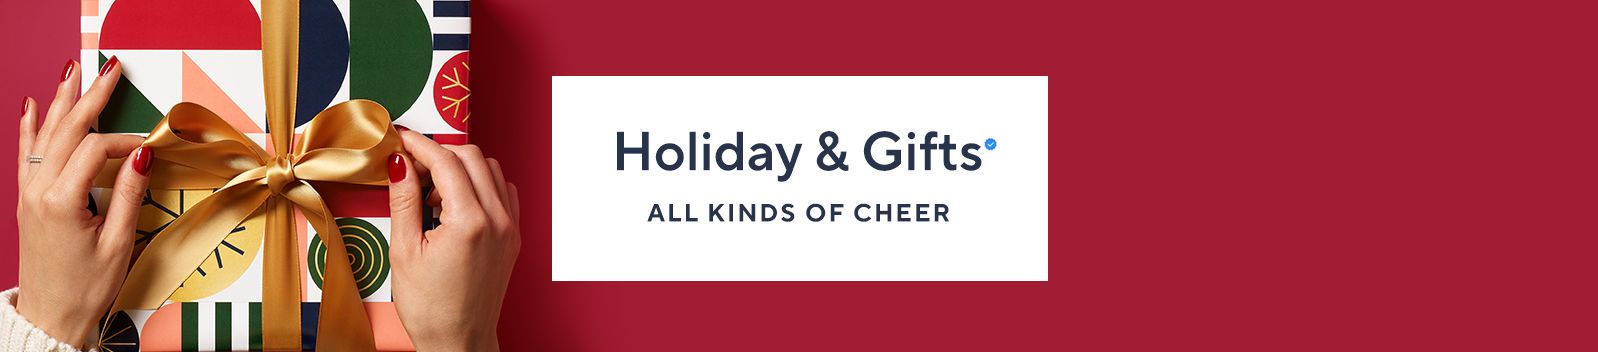 Holiday & Gifts. All Kinds of Cheer